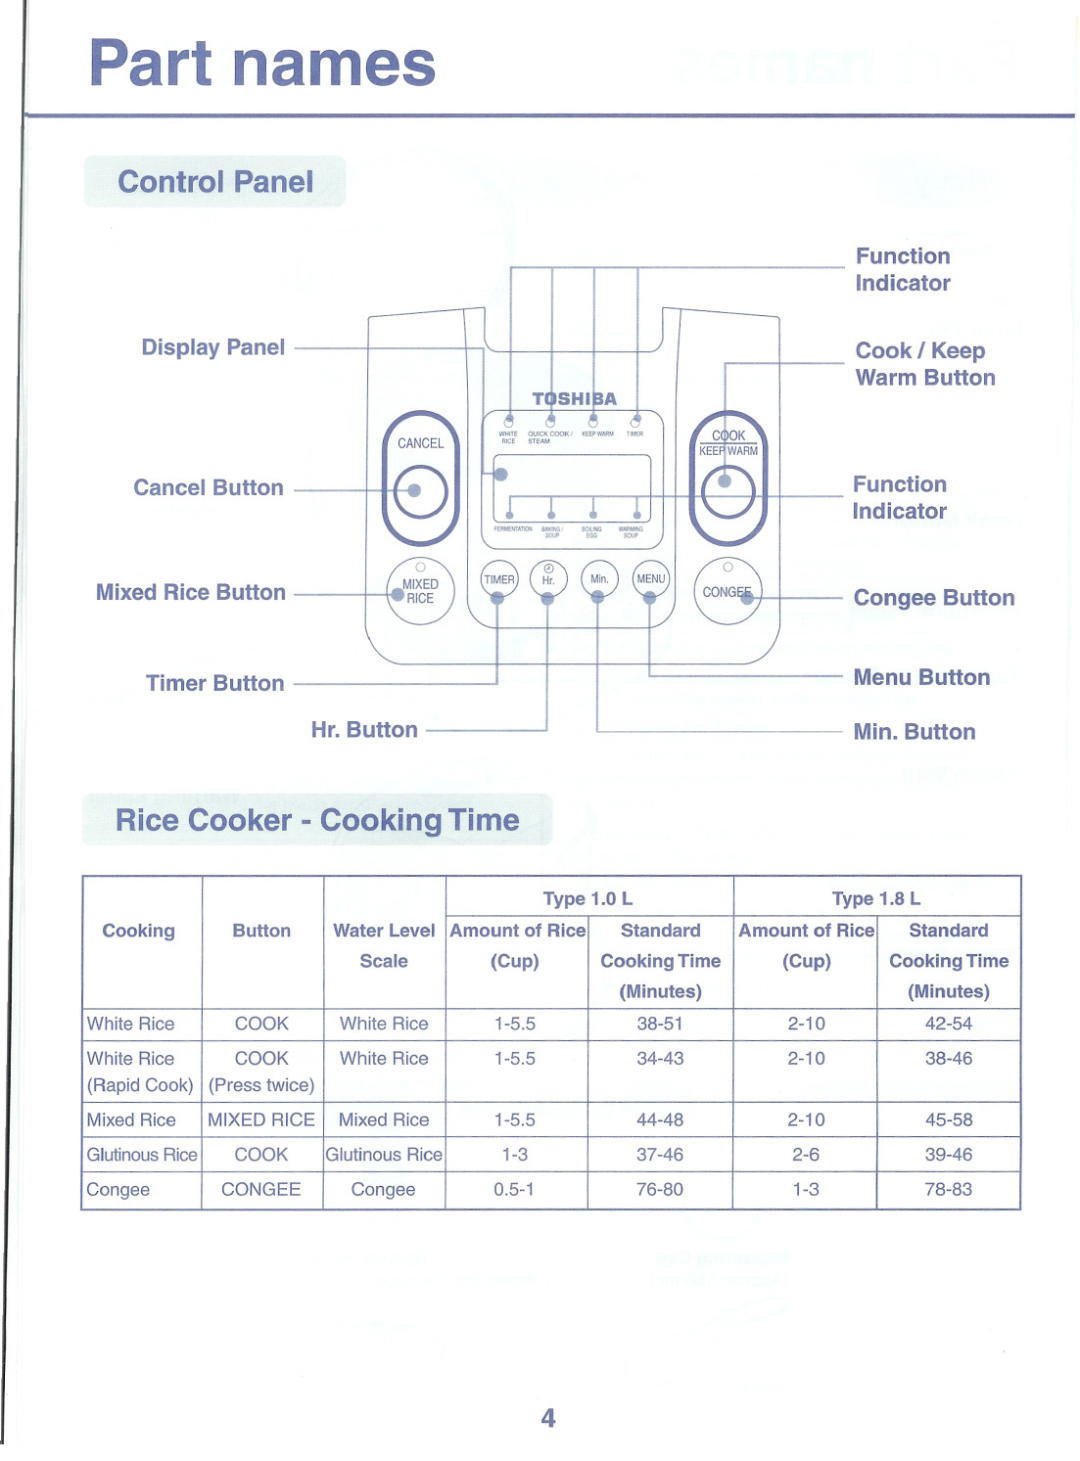 Toshiba RC-10NMF instruction manual Function, Indicator, Rice Cooker - Cooking Time, Hr.Button, Part names, Control Panel 